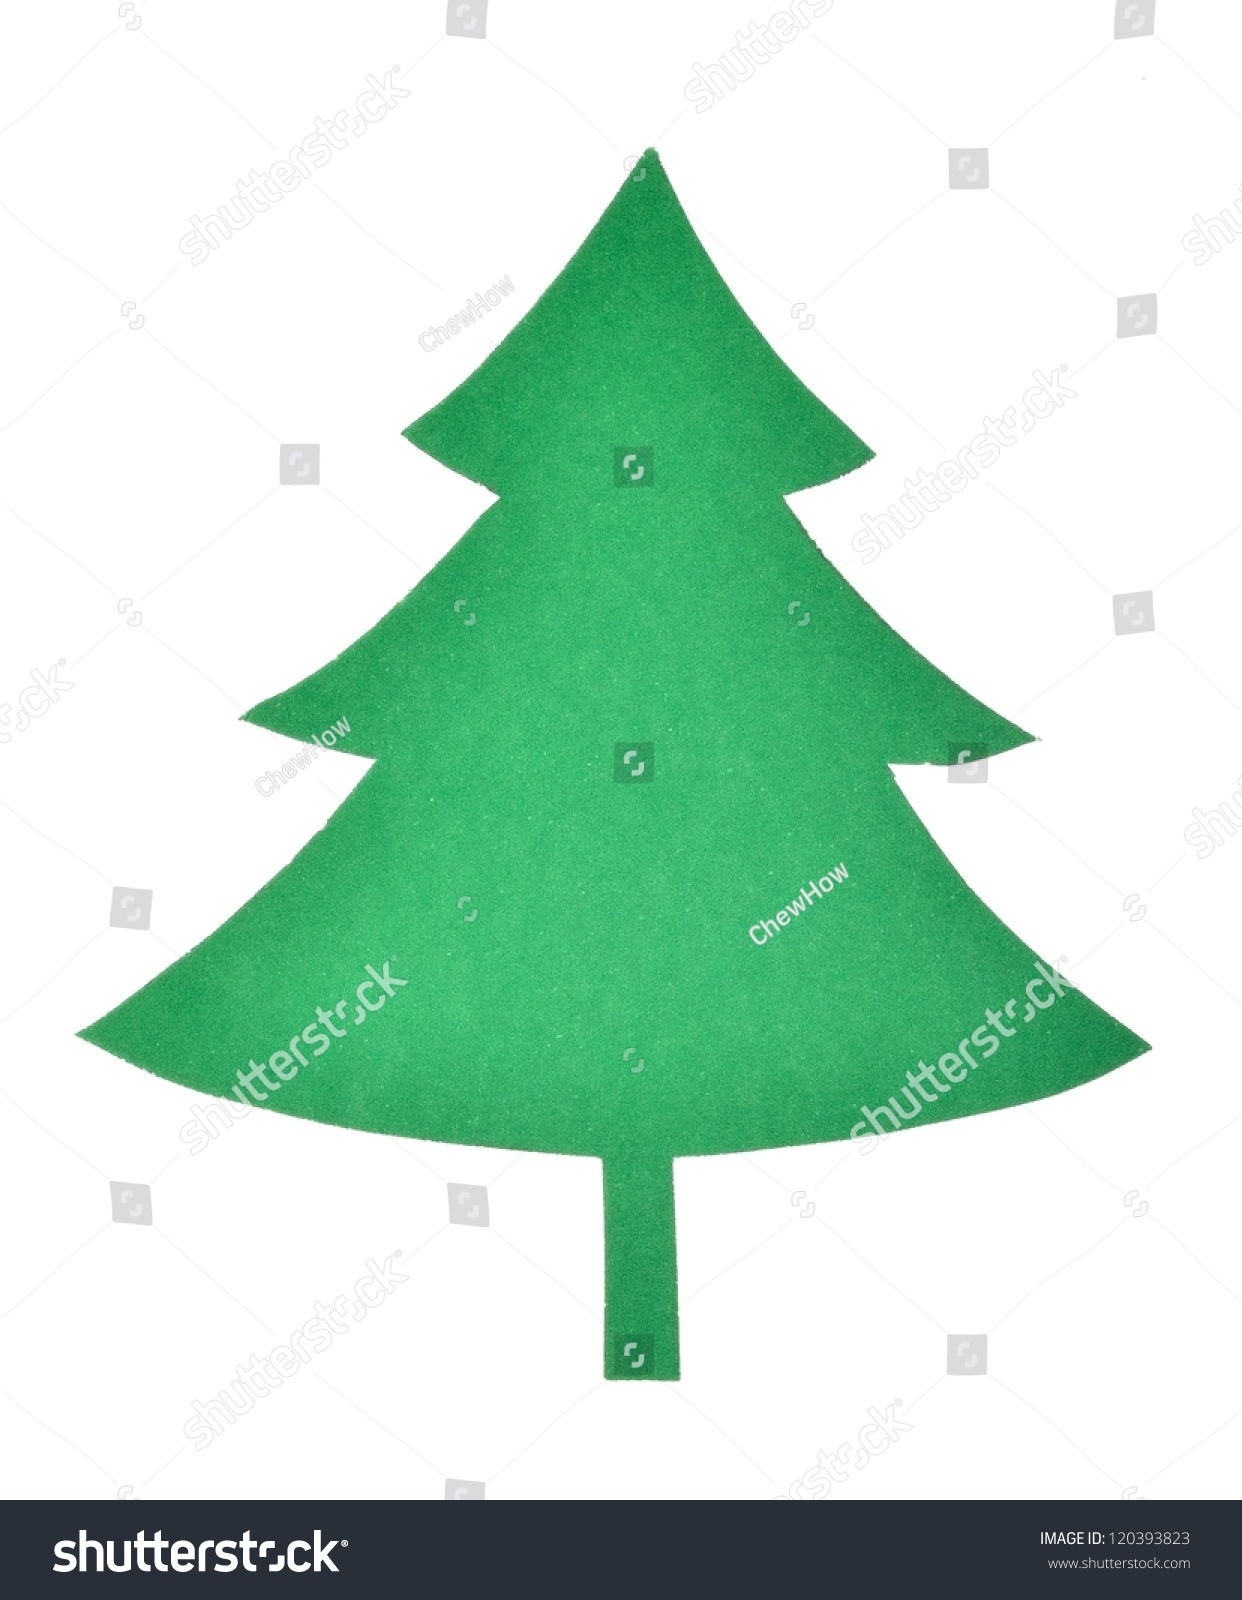 Green Paper Cut Out Christmas Tree Stock Photo 120393823 - Shutterstock